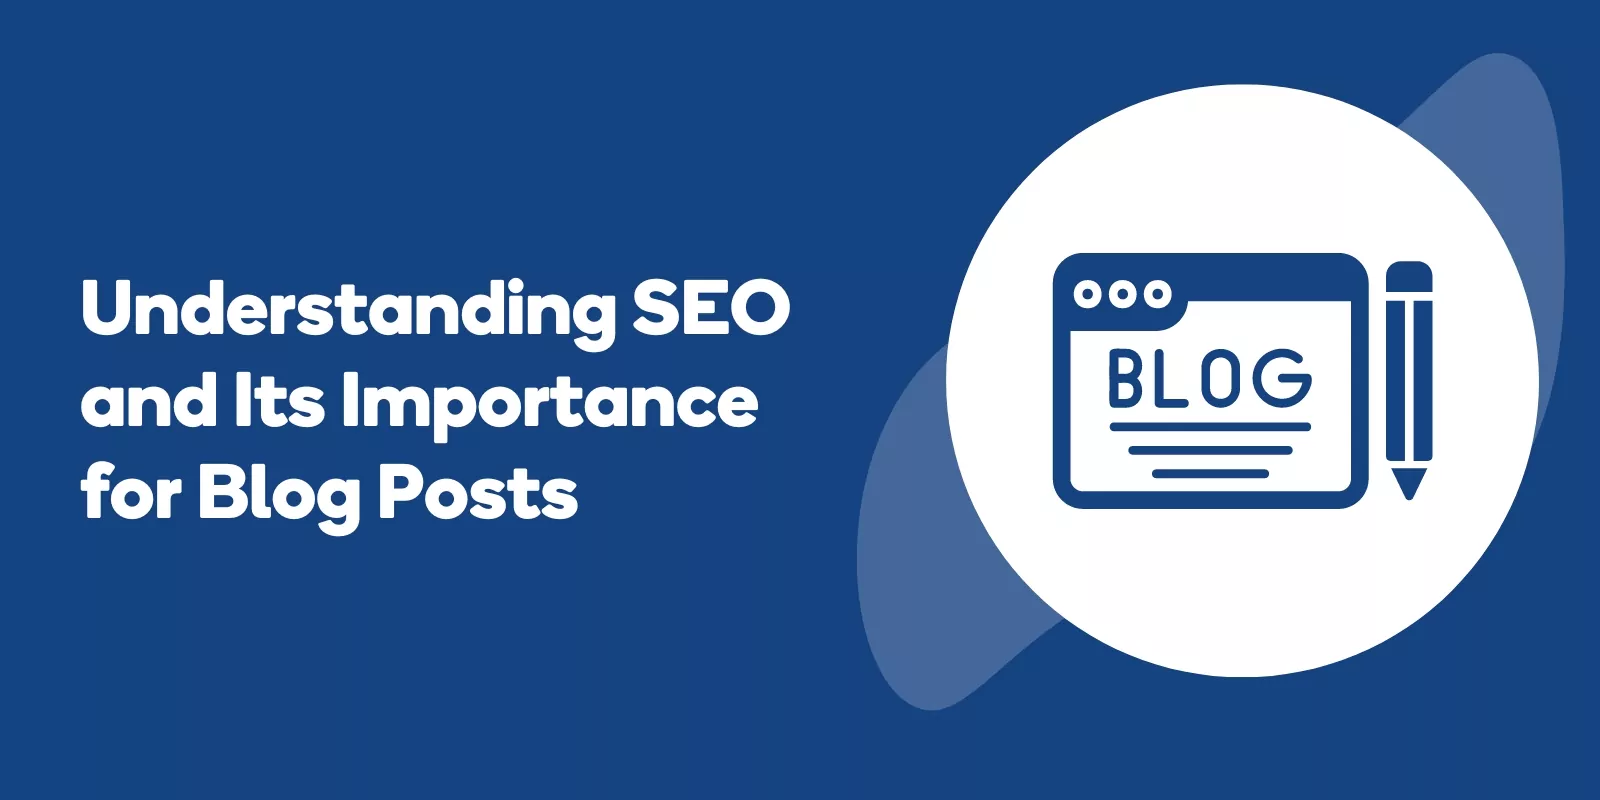 Understanding SEO and Its Importance for Blog Posts